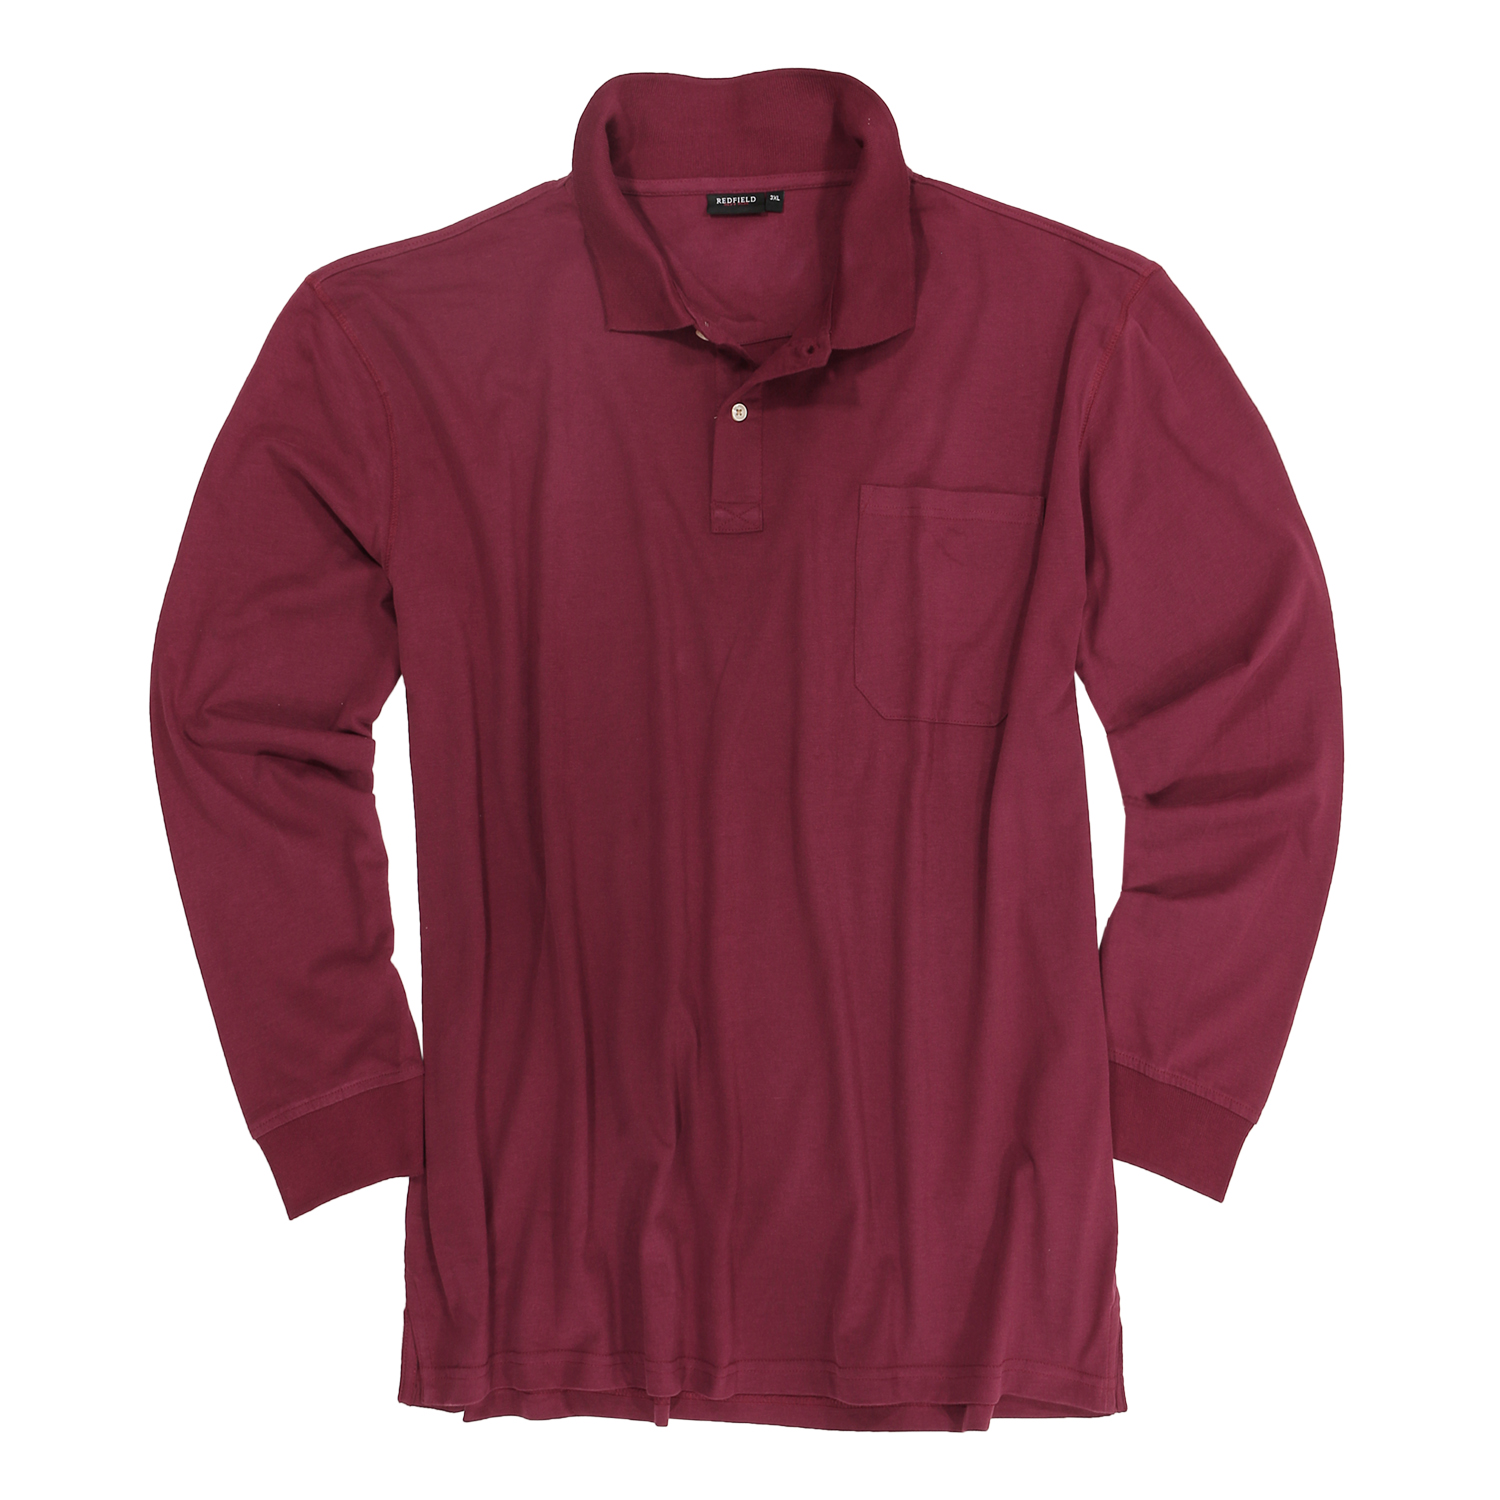 Red shirt by Redfield in plus sizes up to 8XL